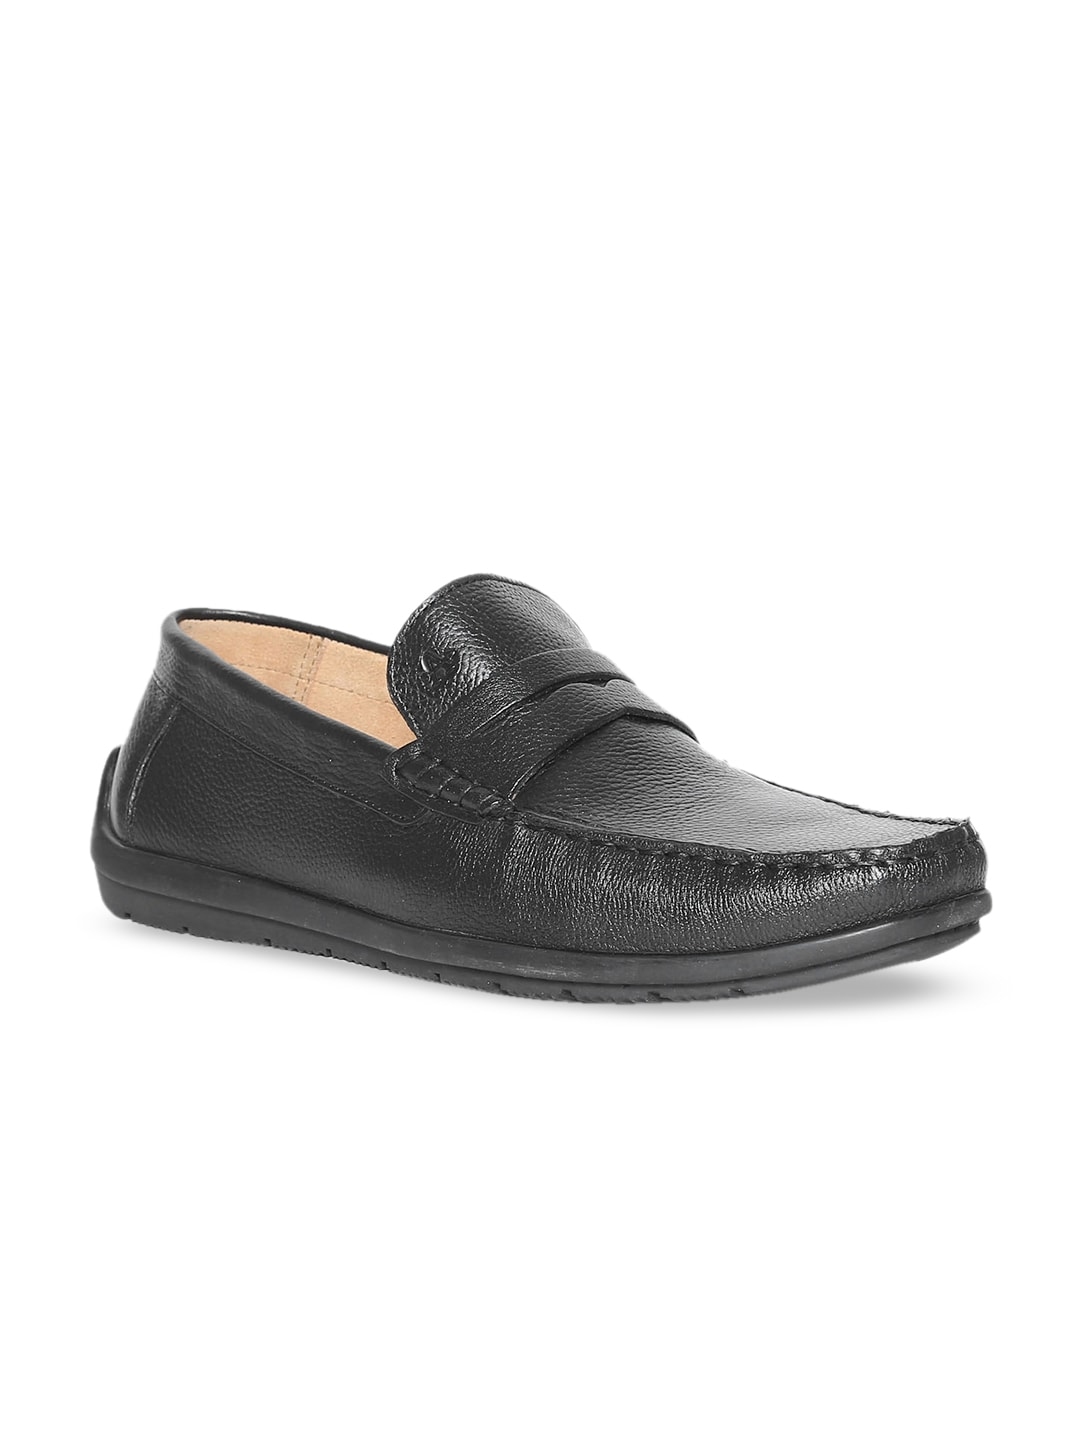 Buy Arrow Men Black Penny Leather Loafers - Casual Shoes for Men ...